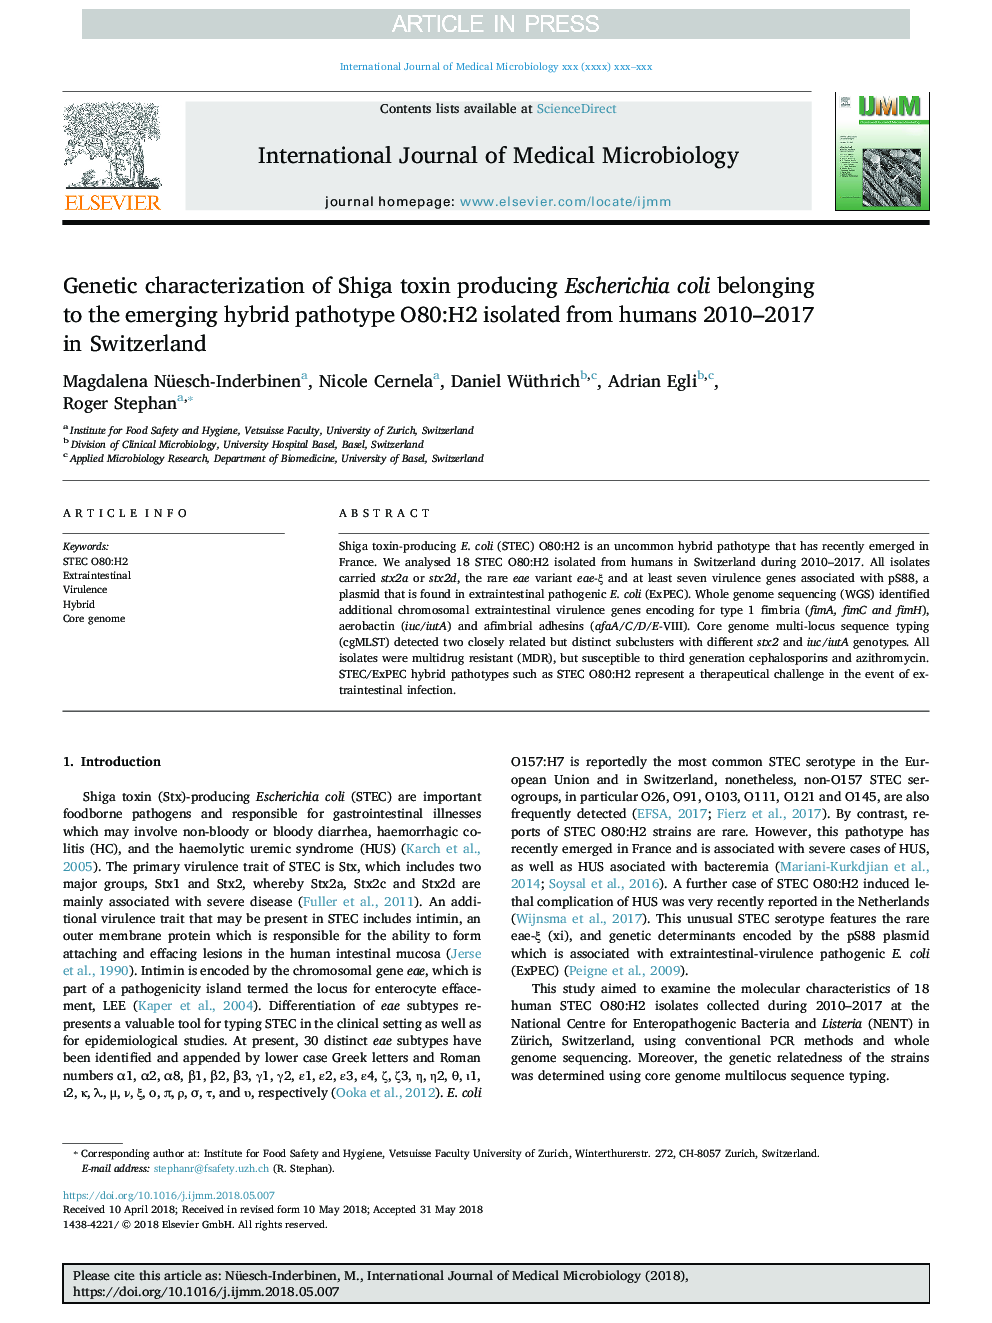 Genetic characterization of Shiga toxin producing Escherichia coli belonging to the emerging hybrid pathotype O80:H2 isolated from humans 2010-2017 in Switzerland